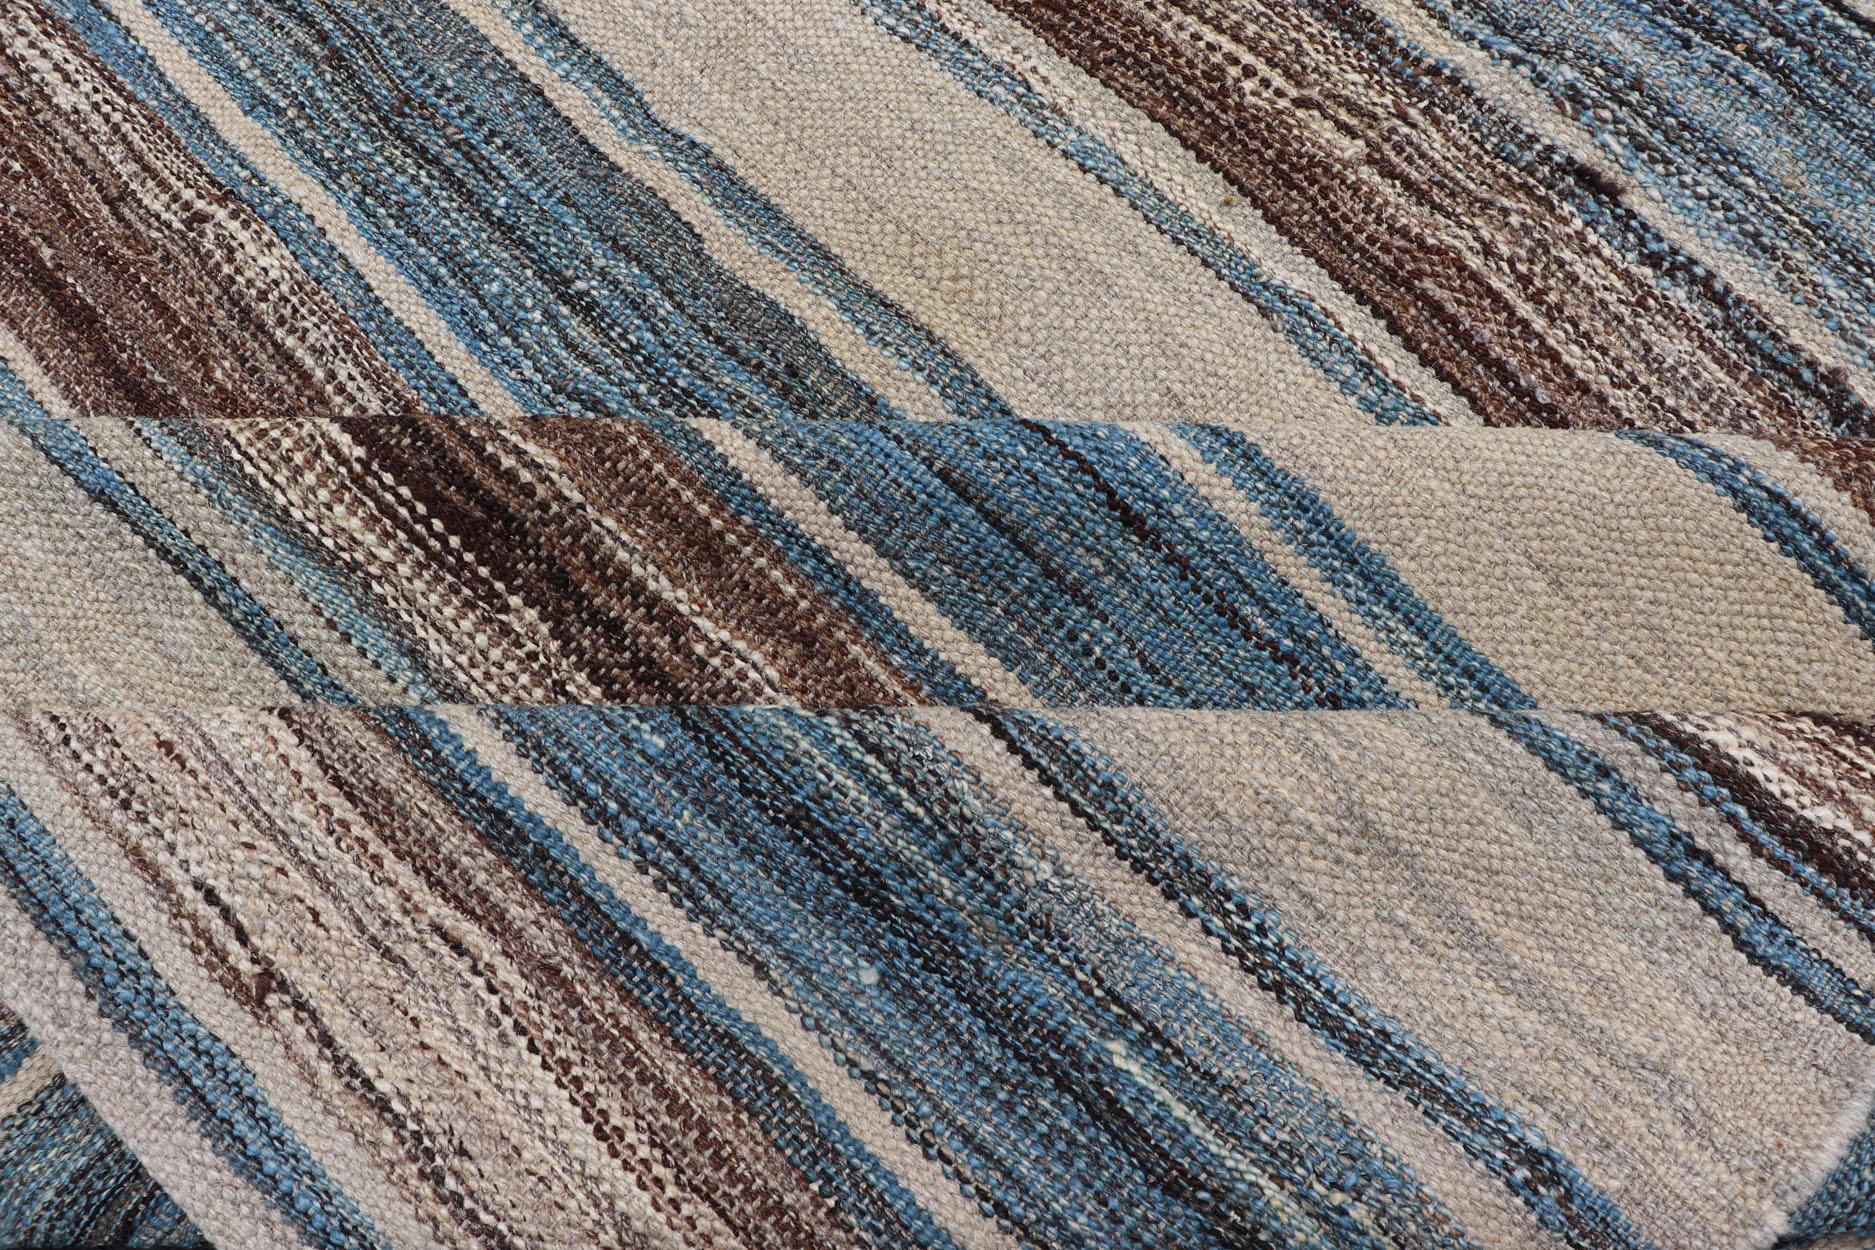 Versatile Striped Design and Natural Brown, Cream, and Blue Flat-Weave Kilim For Sale 5